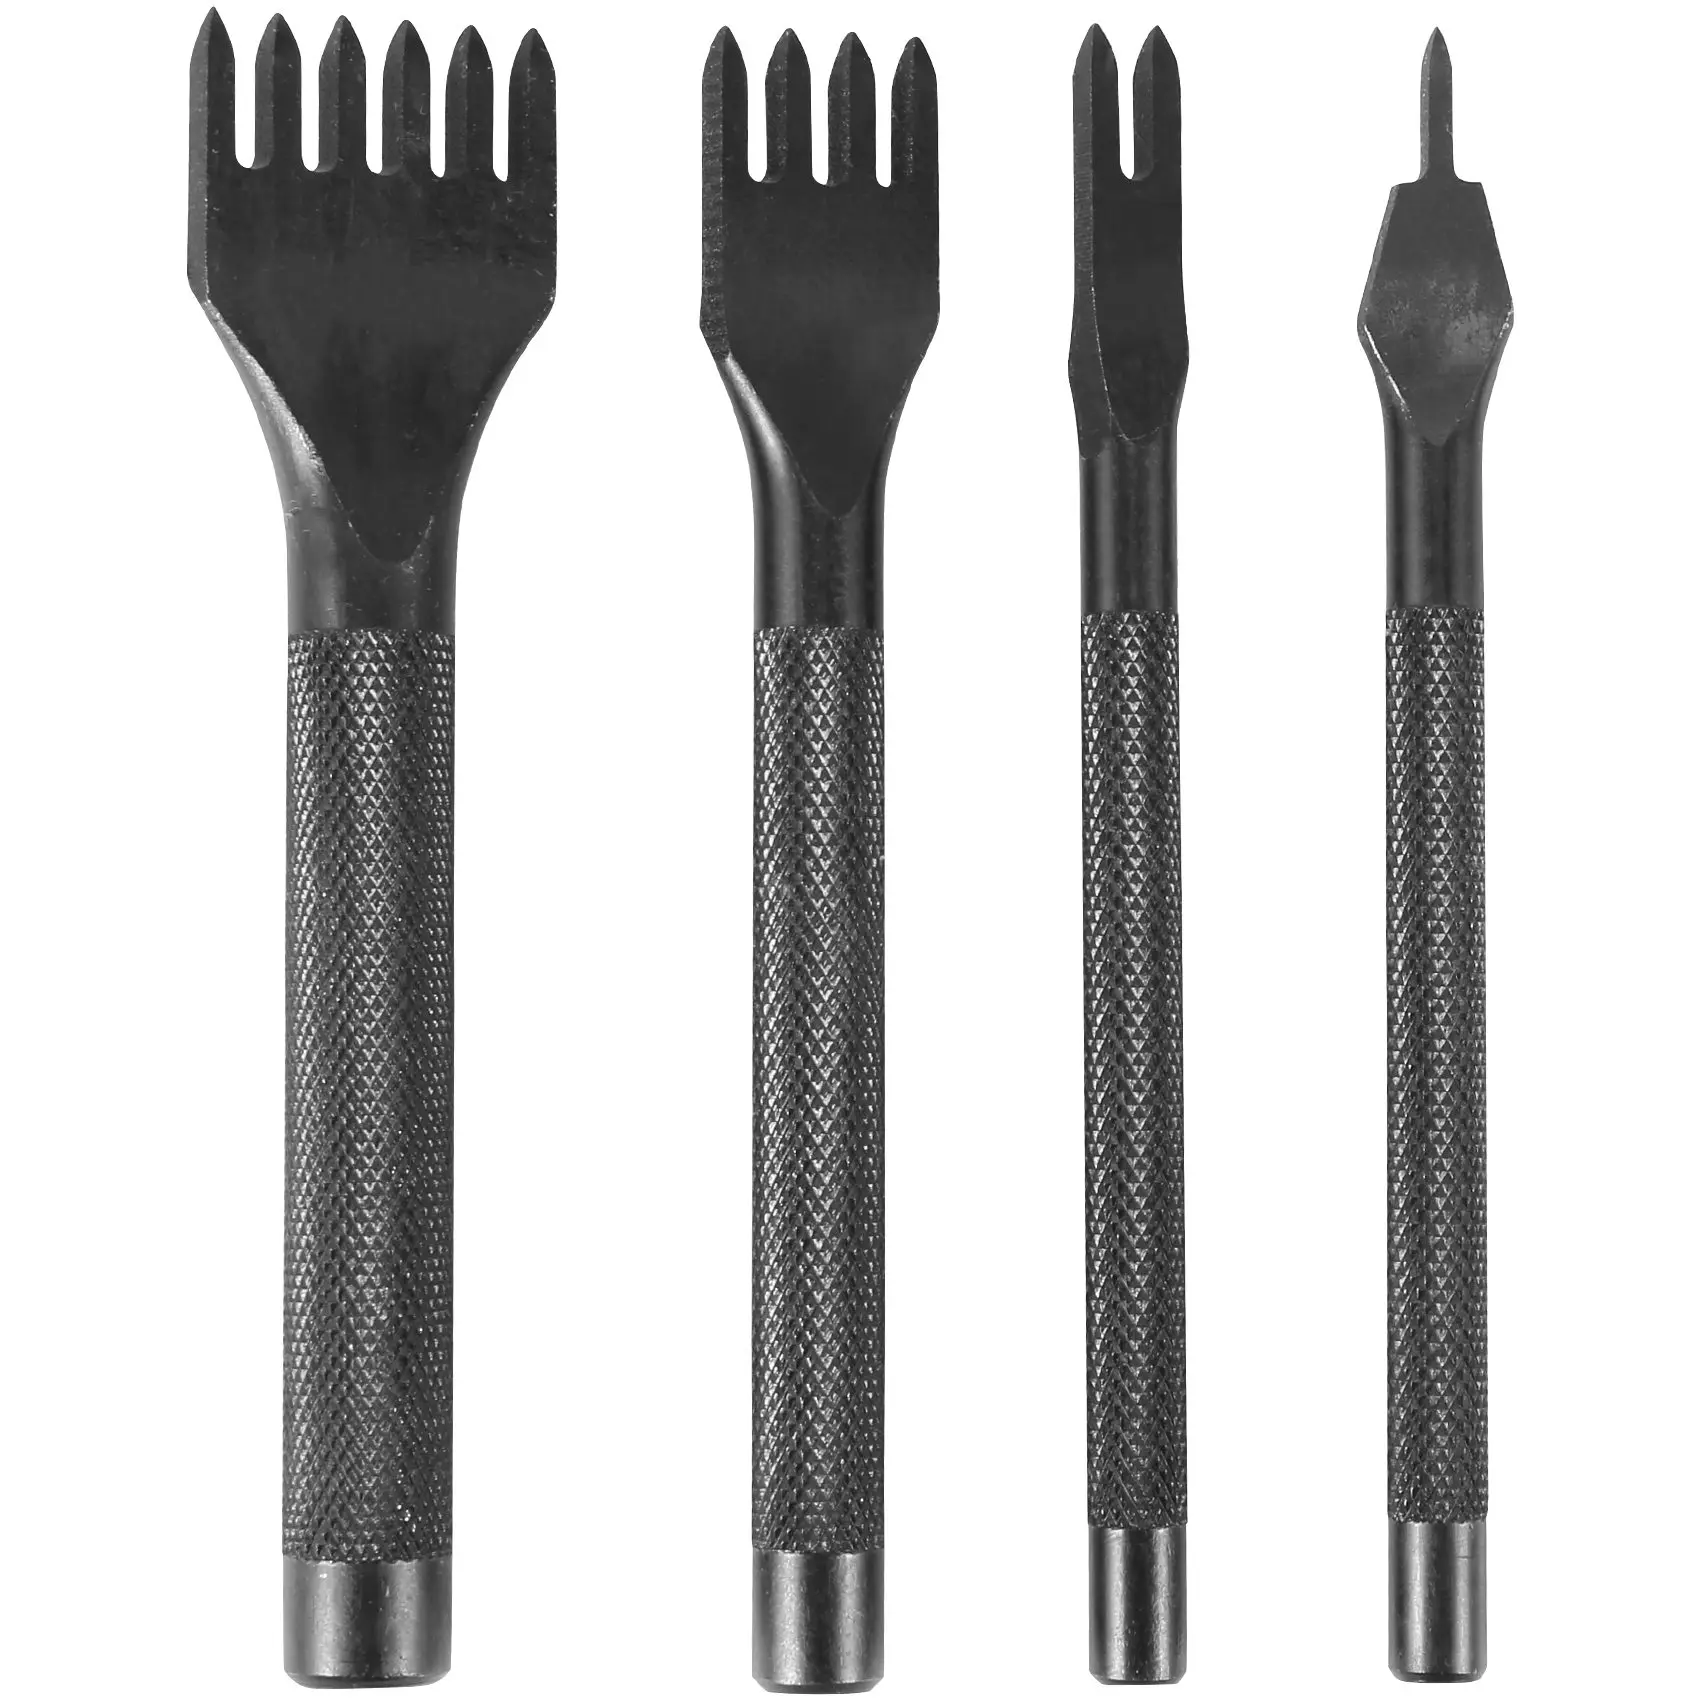 

DIY Diamond Lacing Stitching Chisel Set Leather Craft Kits, Leather Craft Tooth Punching Tool 4mm 1/2/4/6 Prong